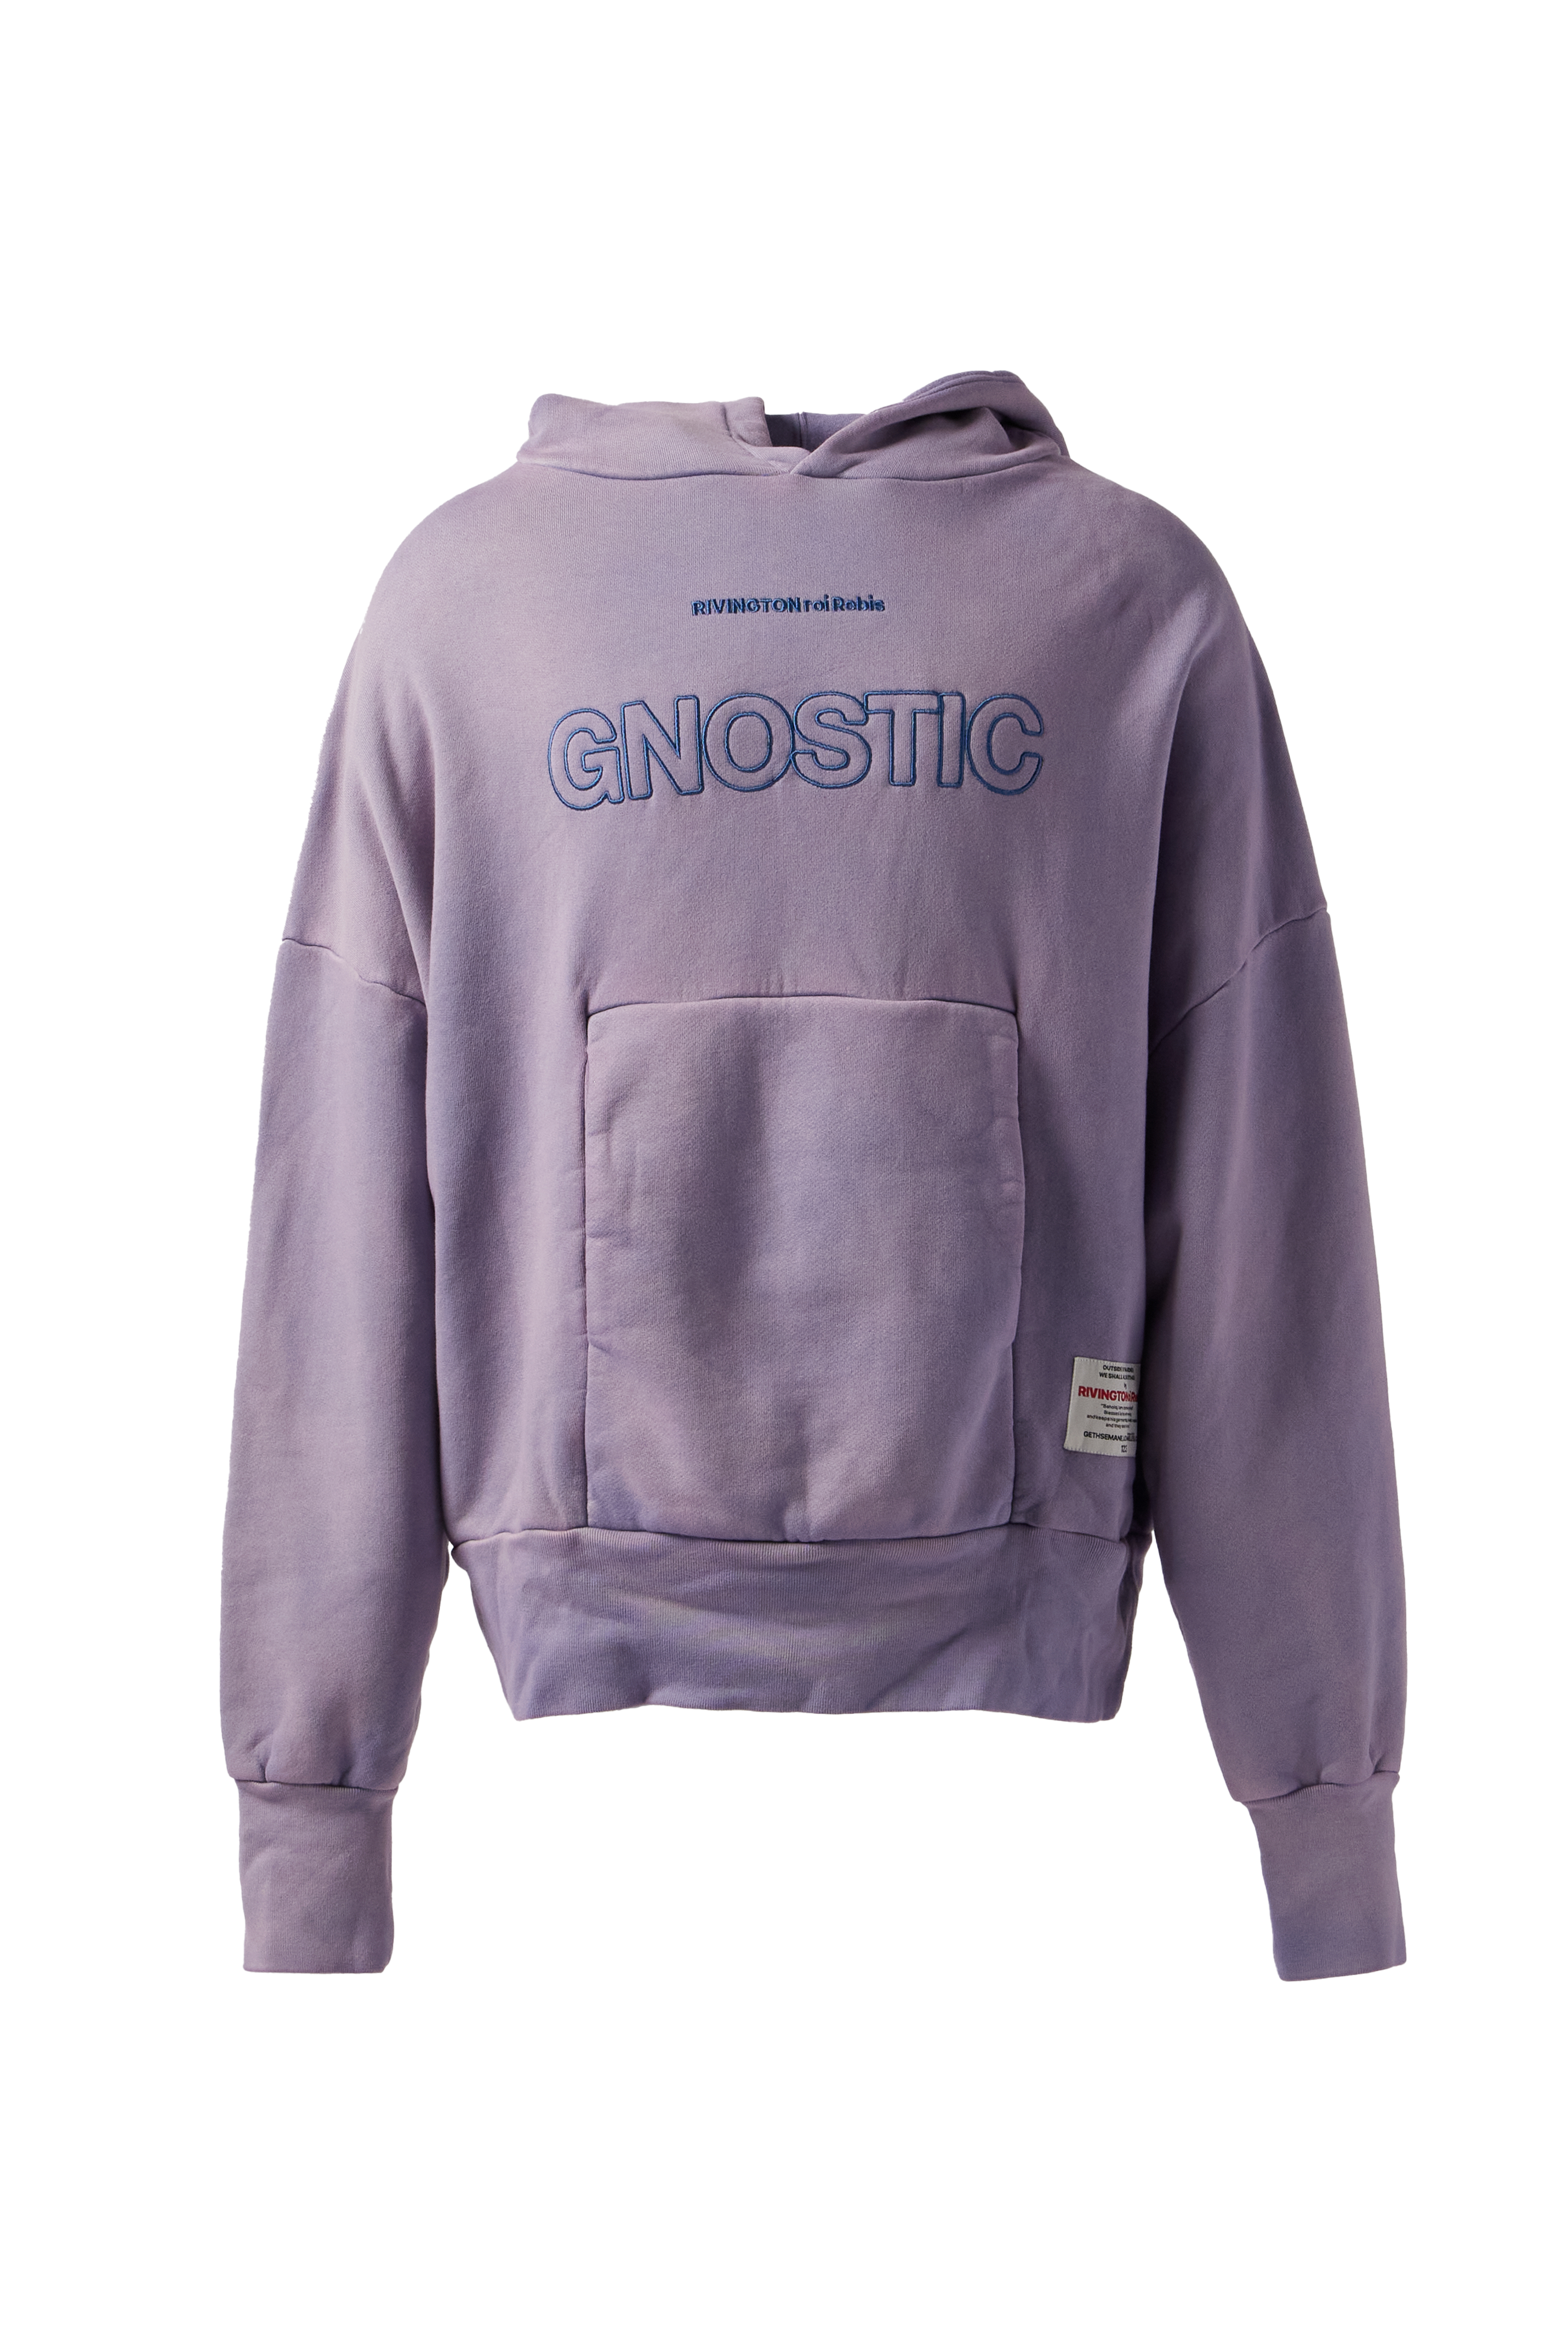 RRR123 - Gnostic Hoodie product image